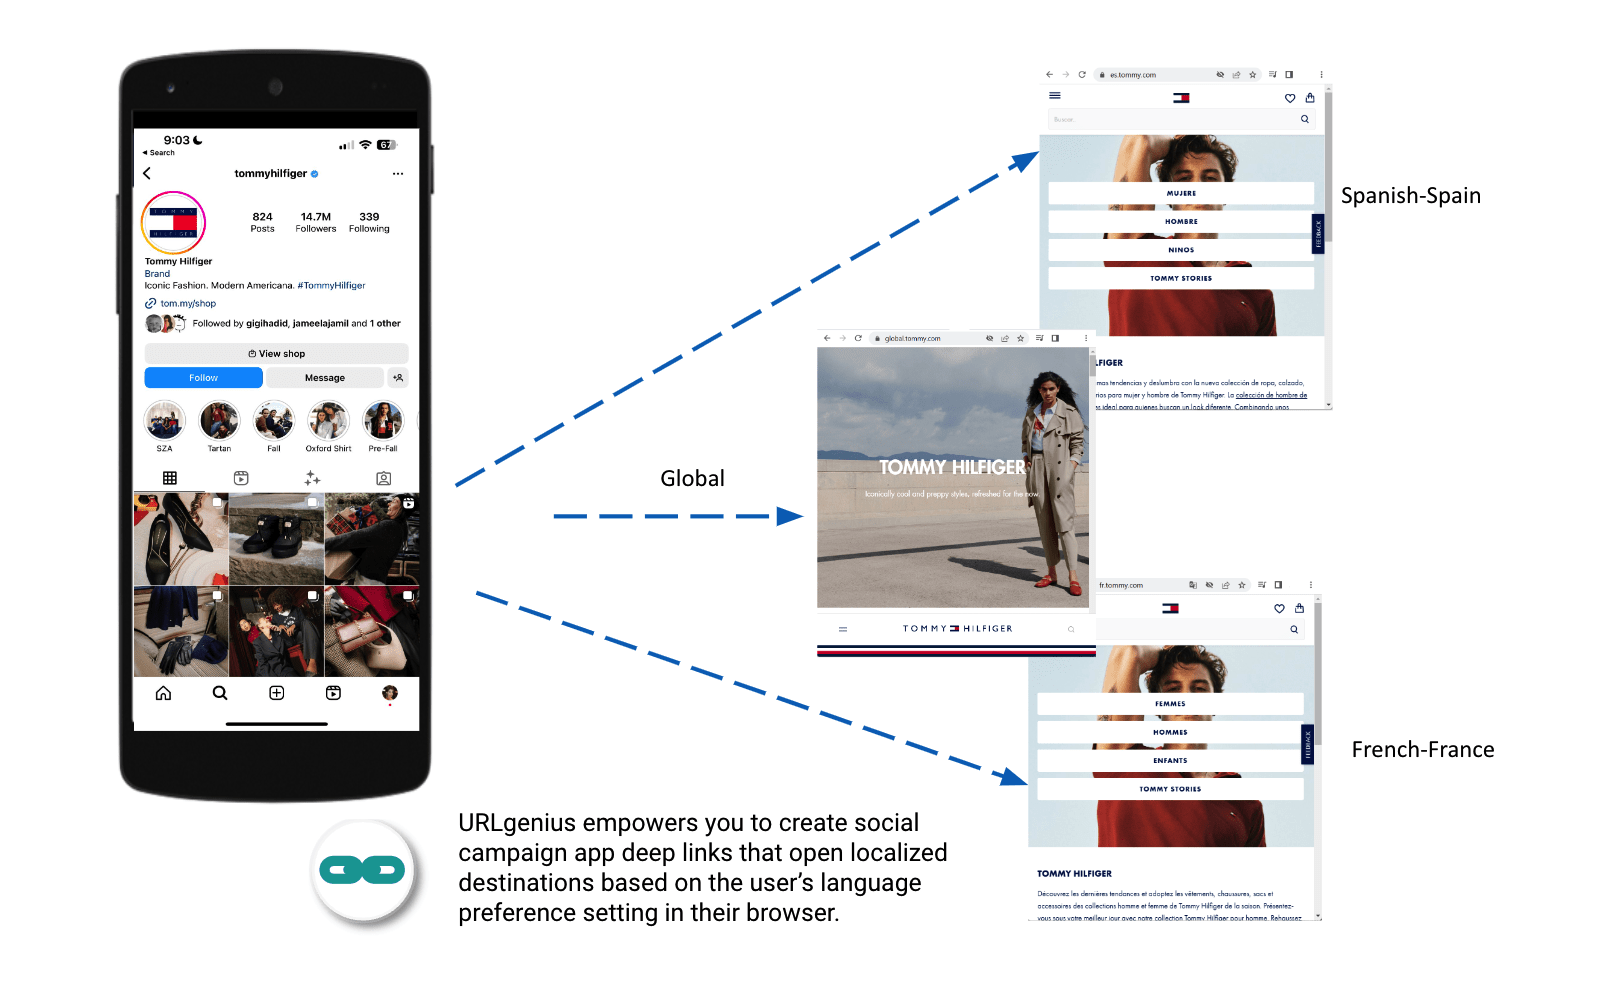 URLgenius empowers you to create social campaign app deep links that open localized destinations based on the user's language preference setting in their browser 